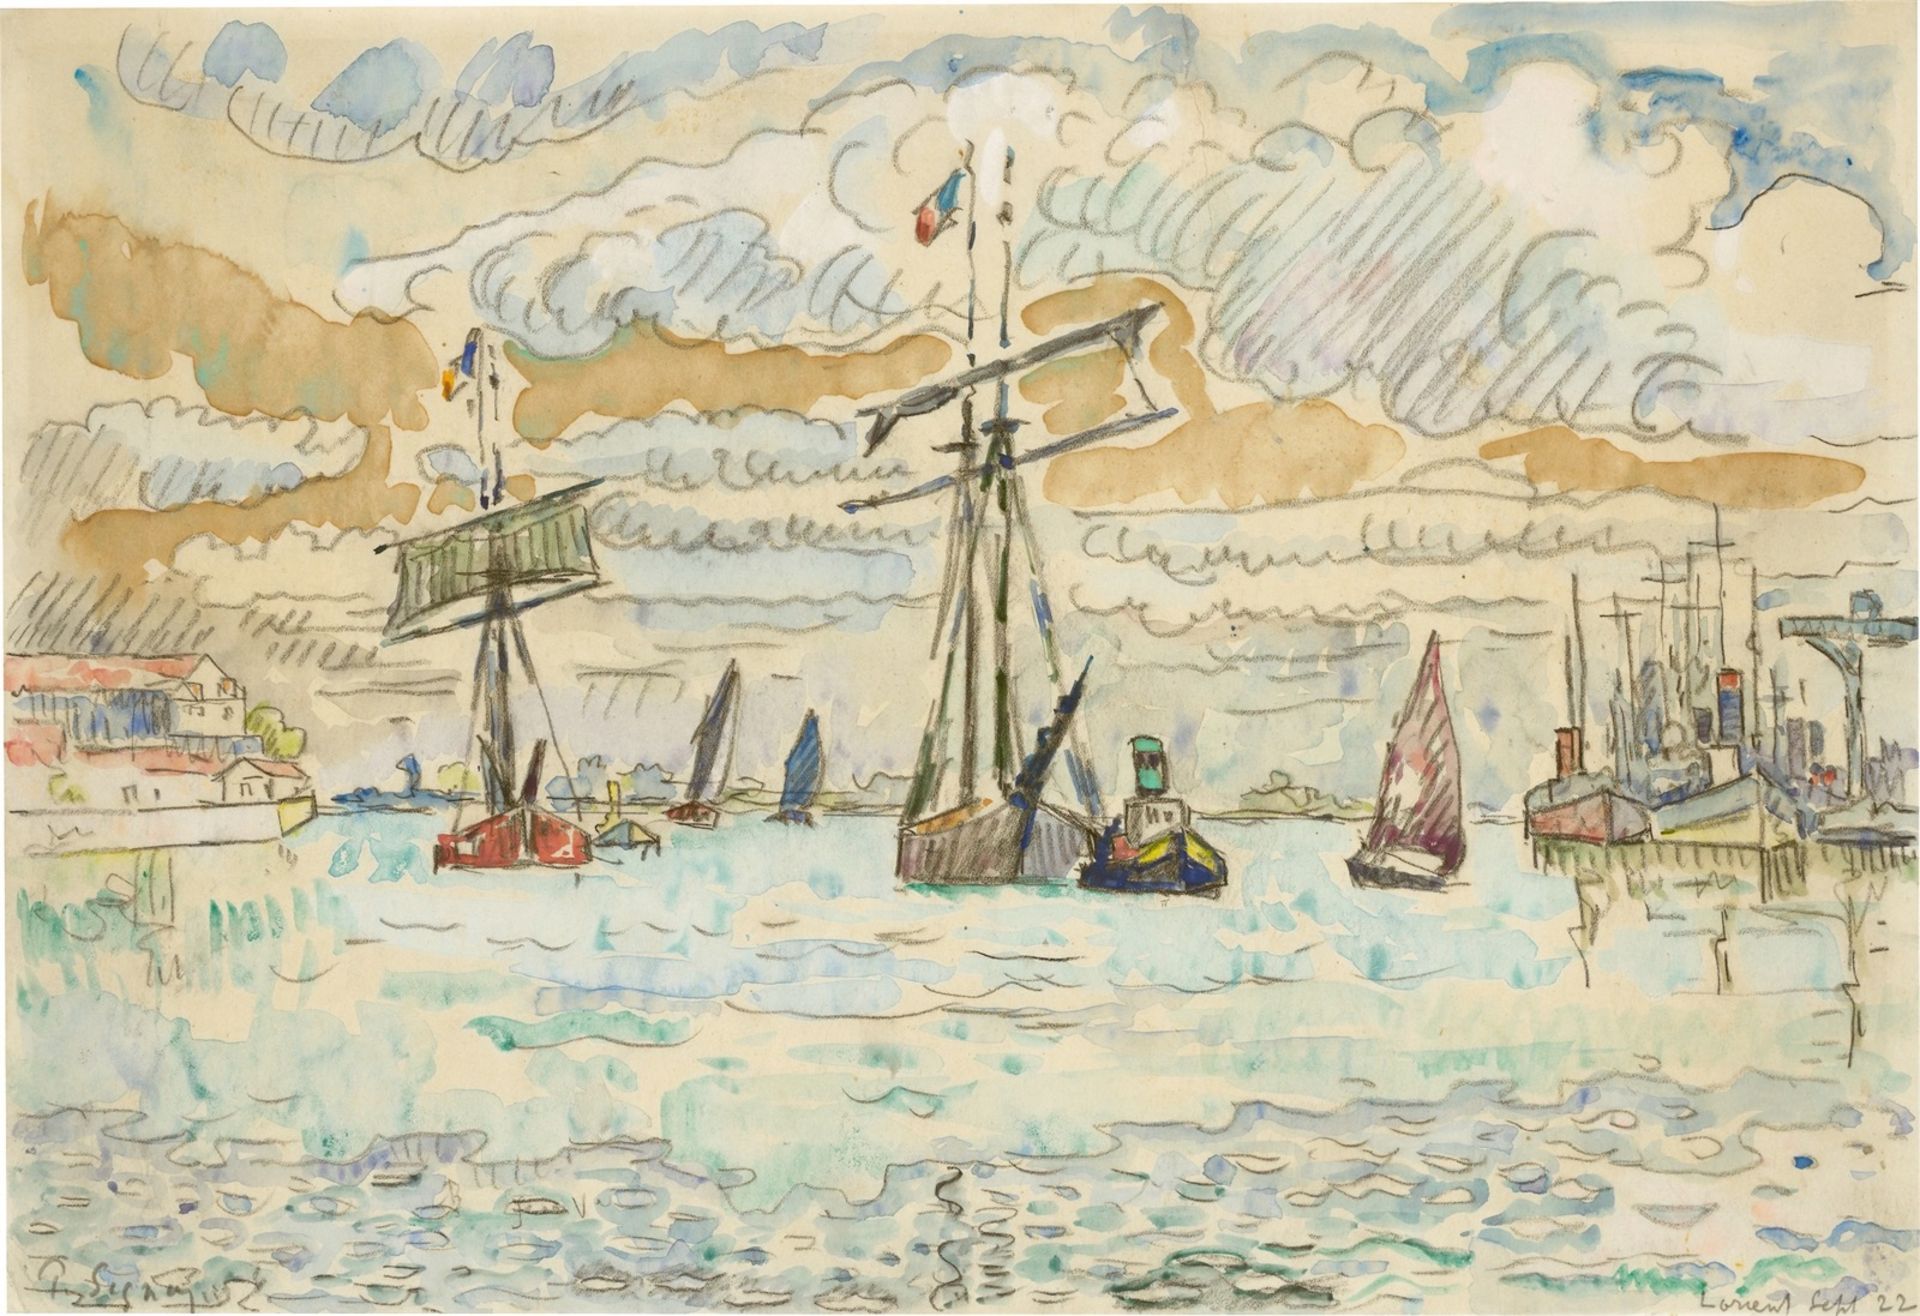 Paul Signac. Harbour Scene with Sailing Boats (”Lorient”). 1922